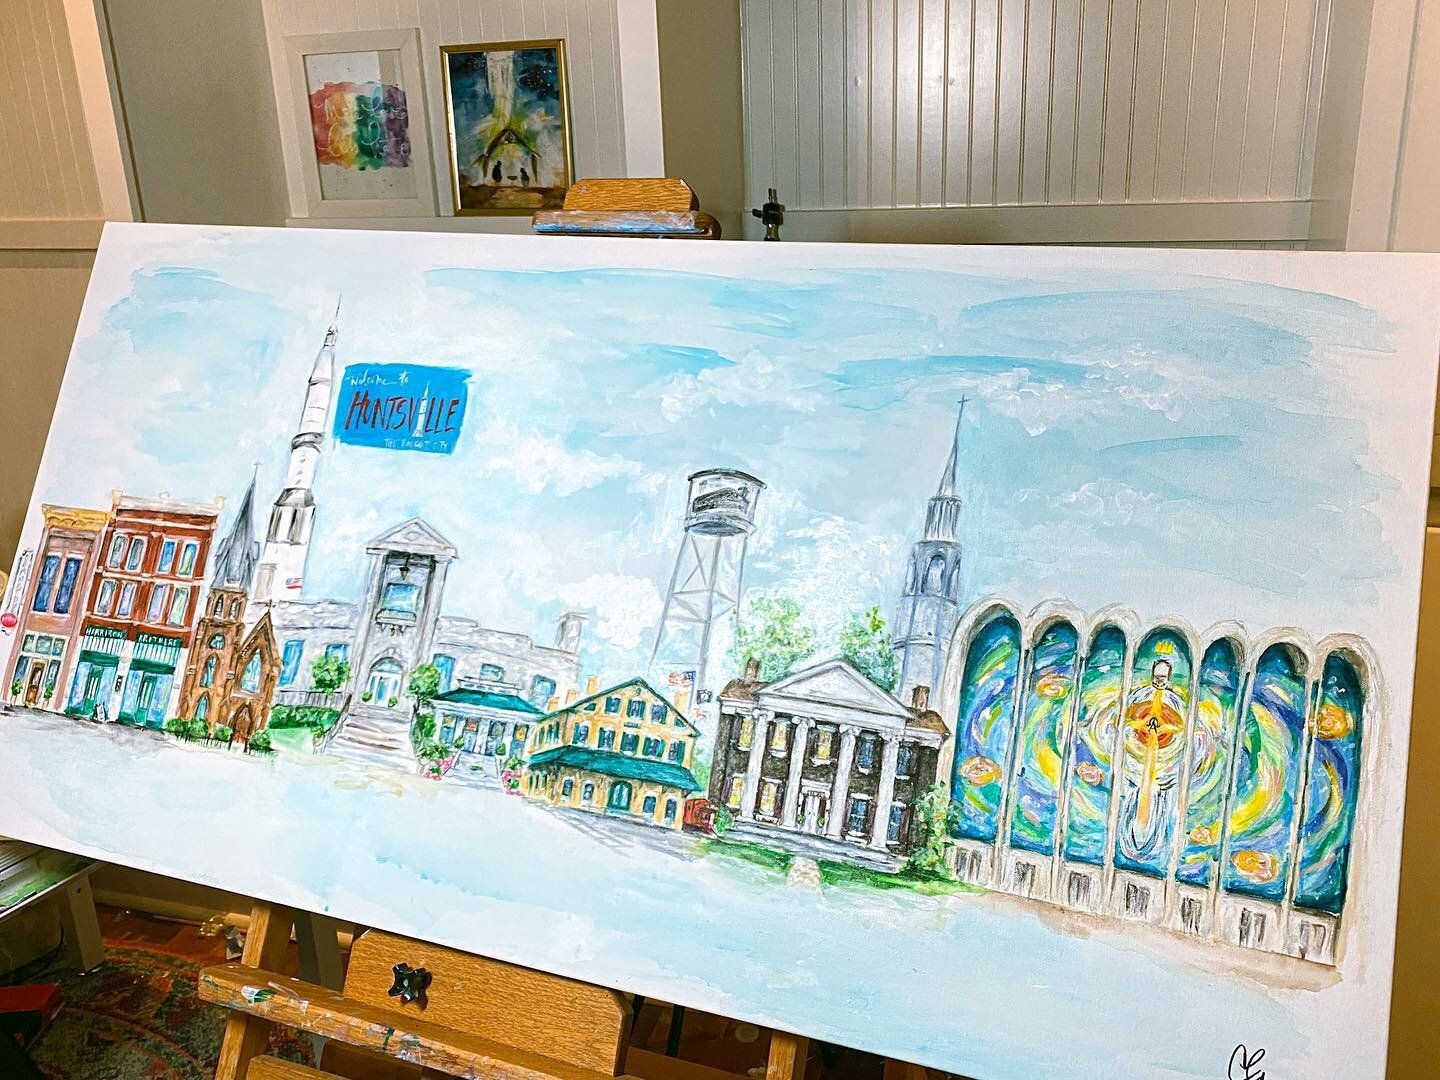 Annnnnd she&rsquo;s done! Largest original I&rsquo;ve created to date: a customized Huntsville Cityscape in acrylic on 24&rdquo; x 48&rdquo; canvas. I could paint Huntsville all day and never get tired of it 😍